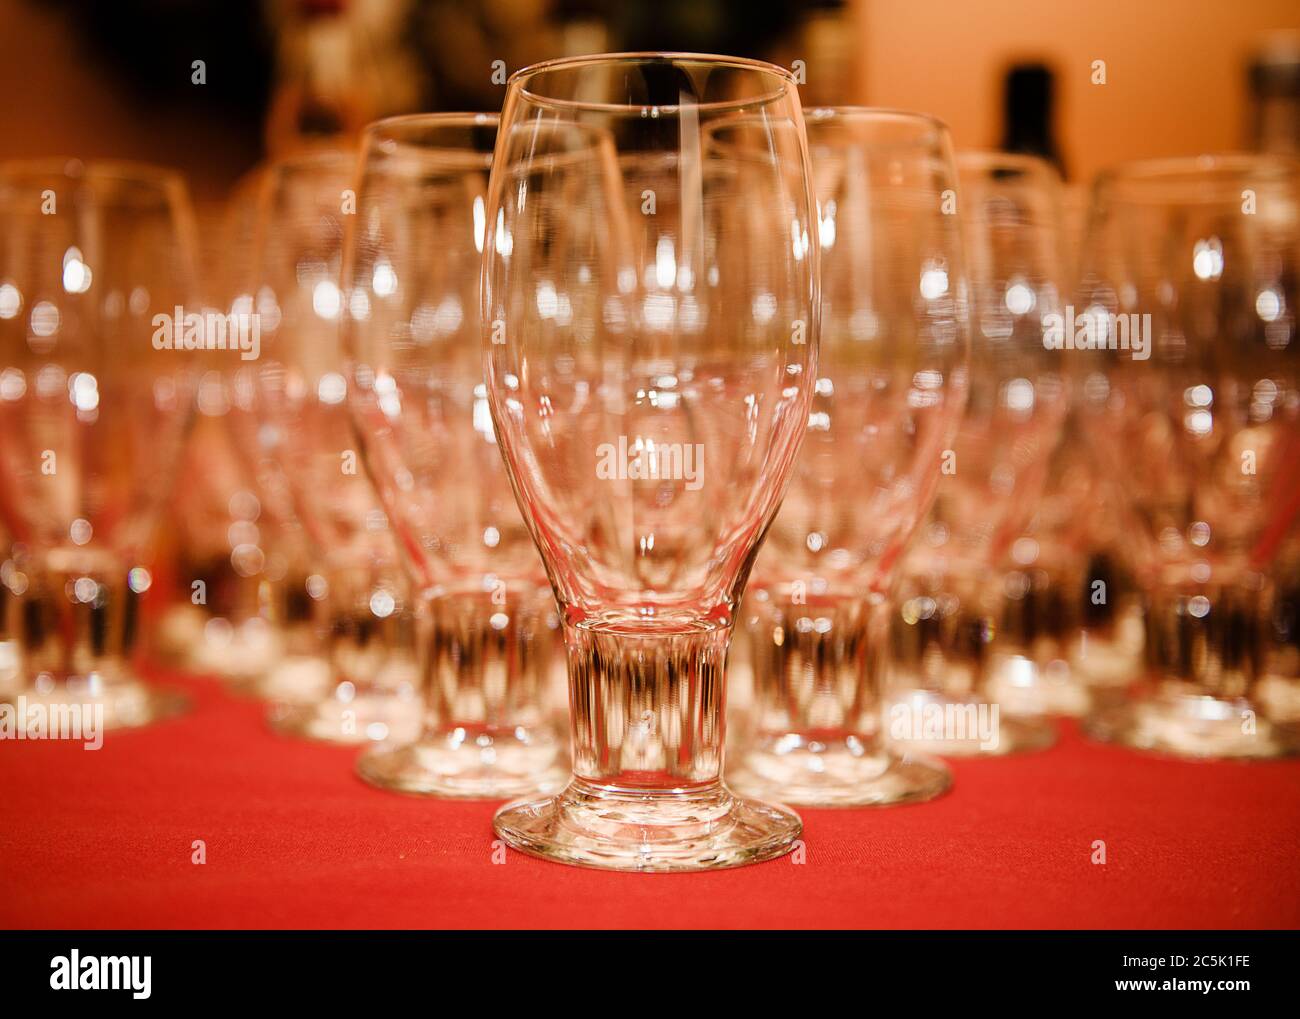 Empty beer glasses ready to be filled at an event Stock Photo